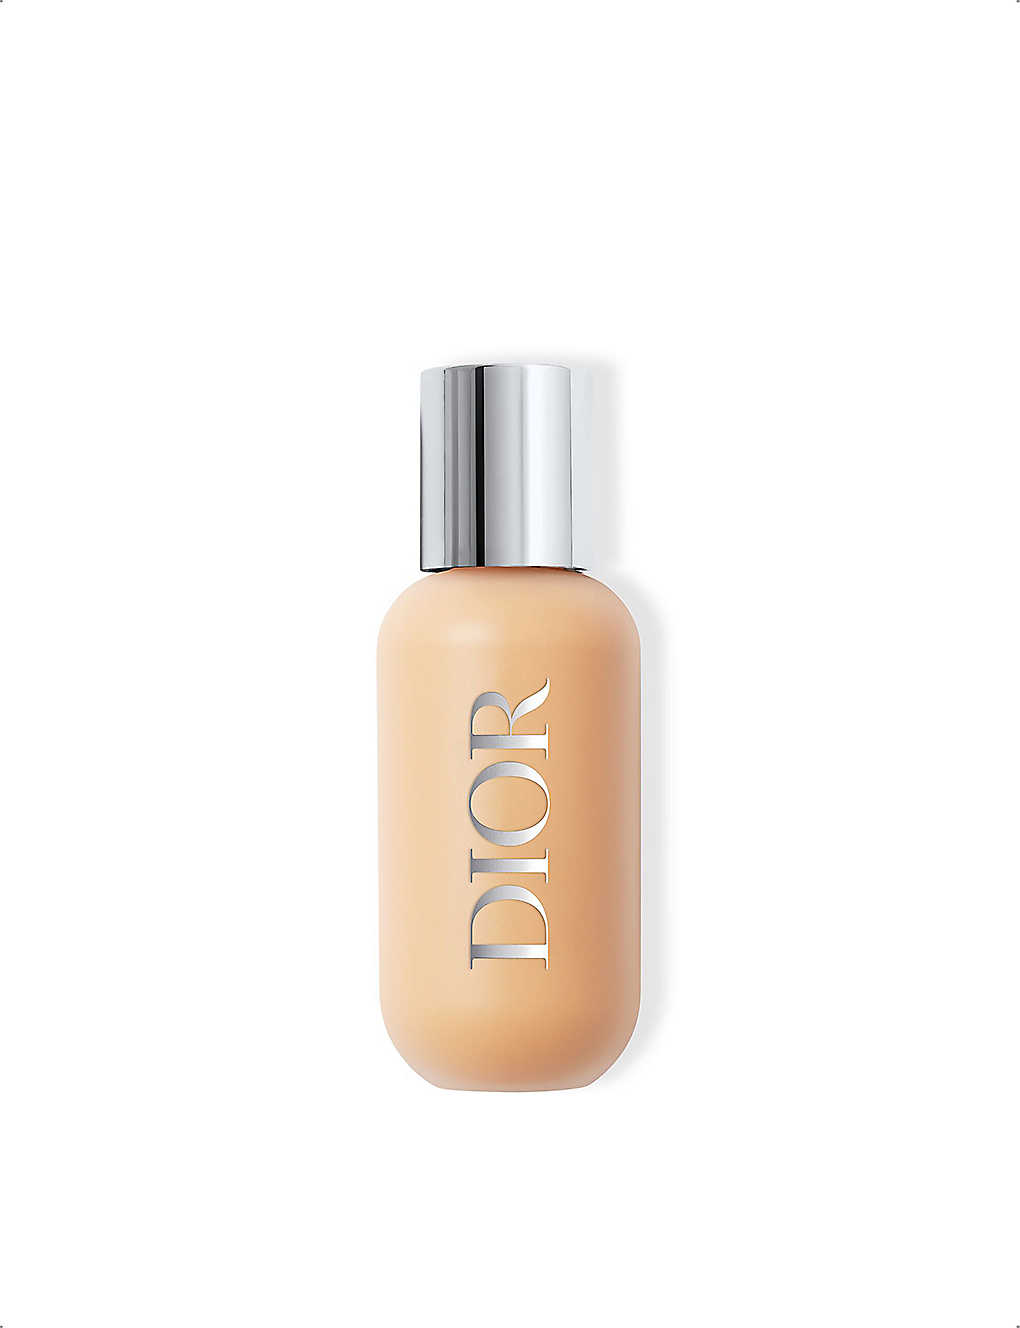 Dior Backstage Face & Body Foundation 50ml In 3w